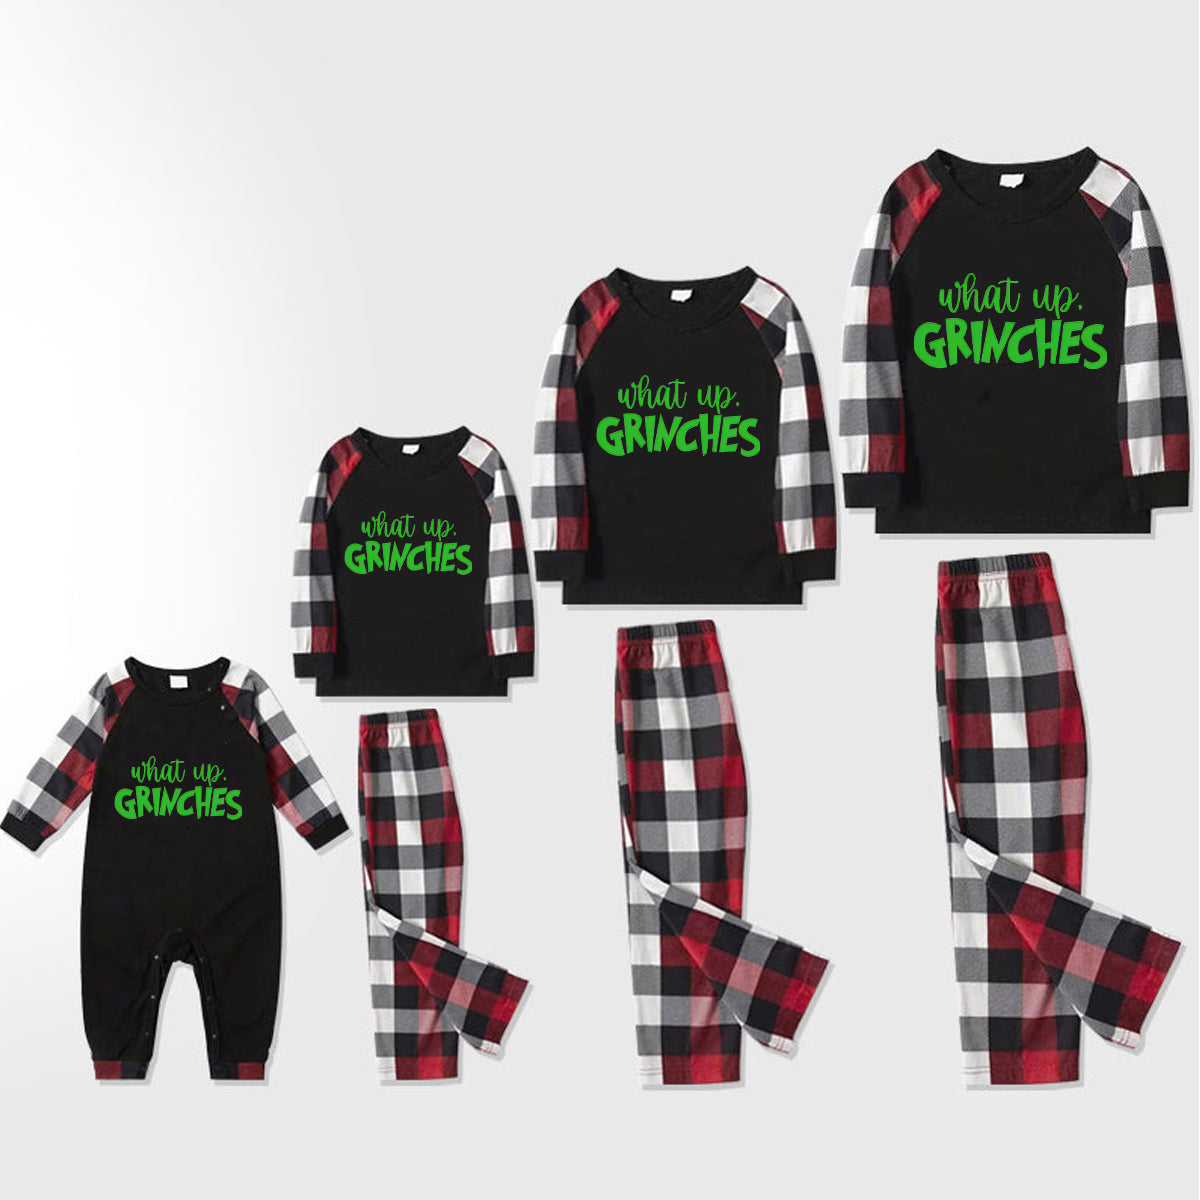 Christmas 'What Up' Letter Print Casual Plaid Sleeve Contrast Tops and Red & Black & White Plaid Pants Family Matching Pajamas Set With Dog Bandana